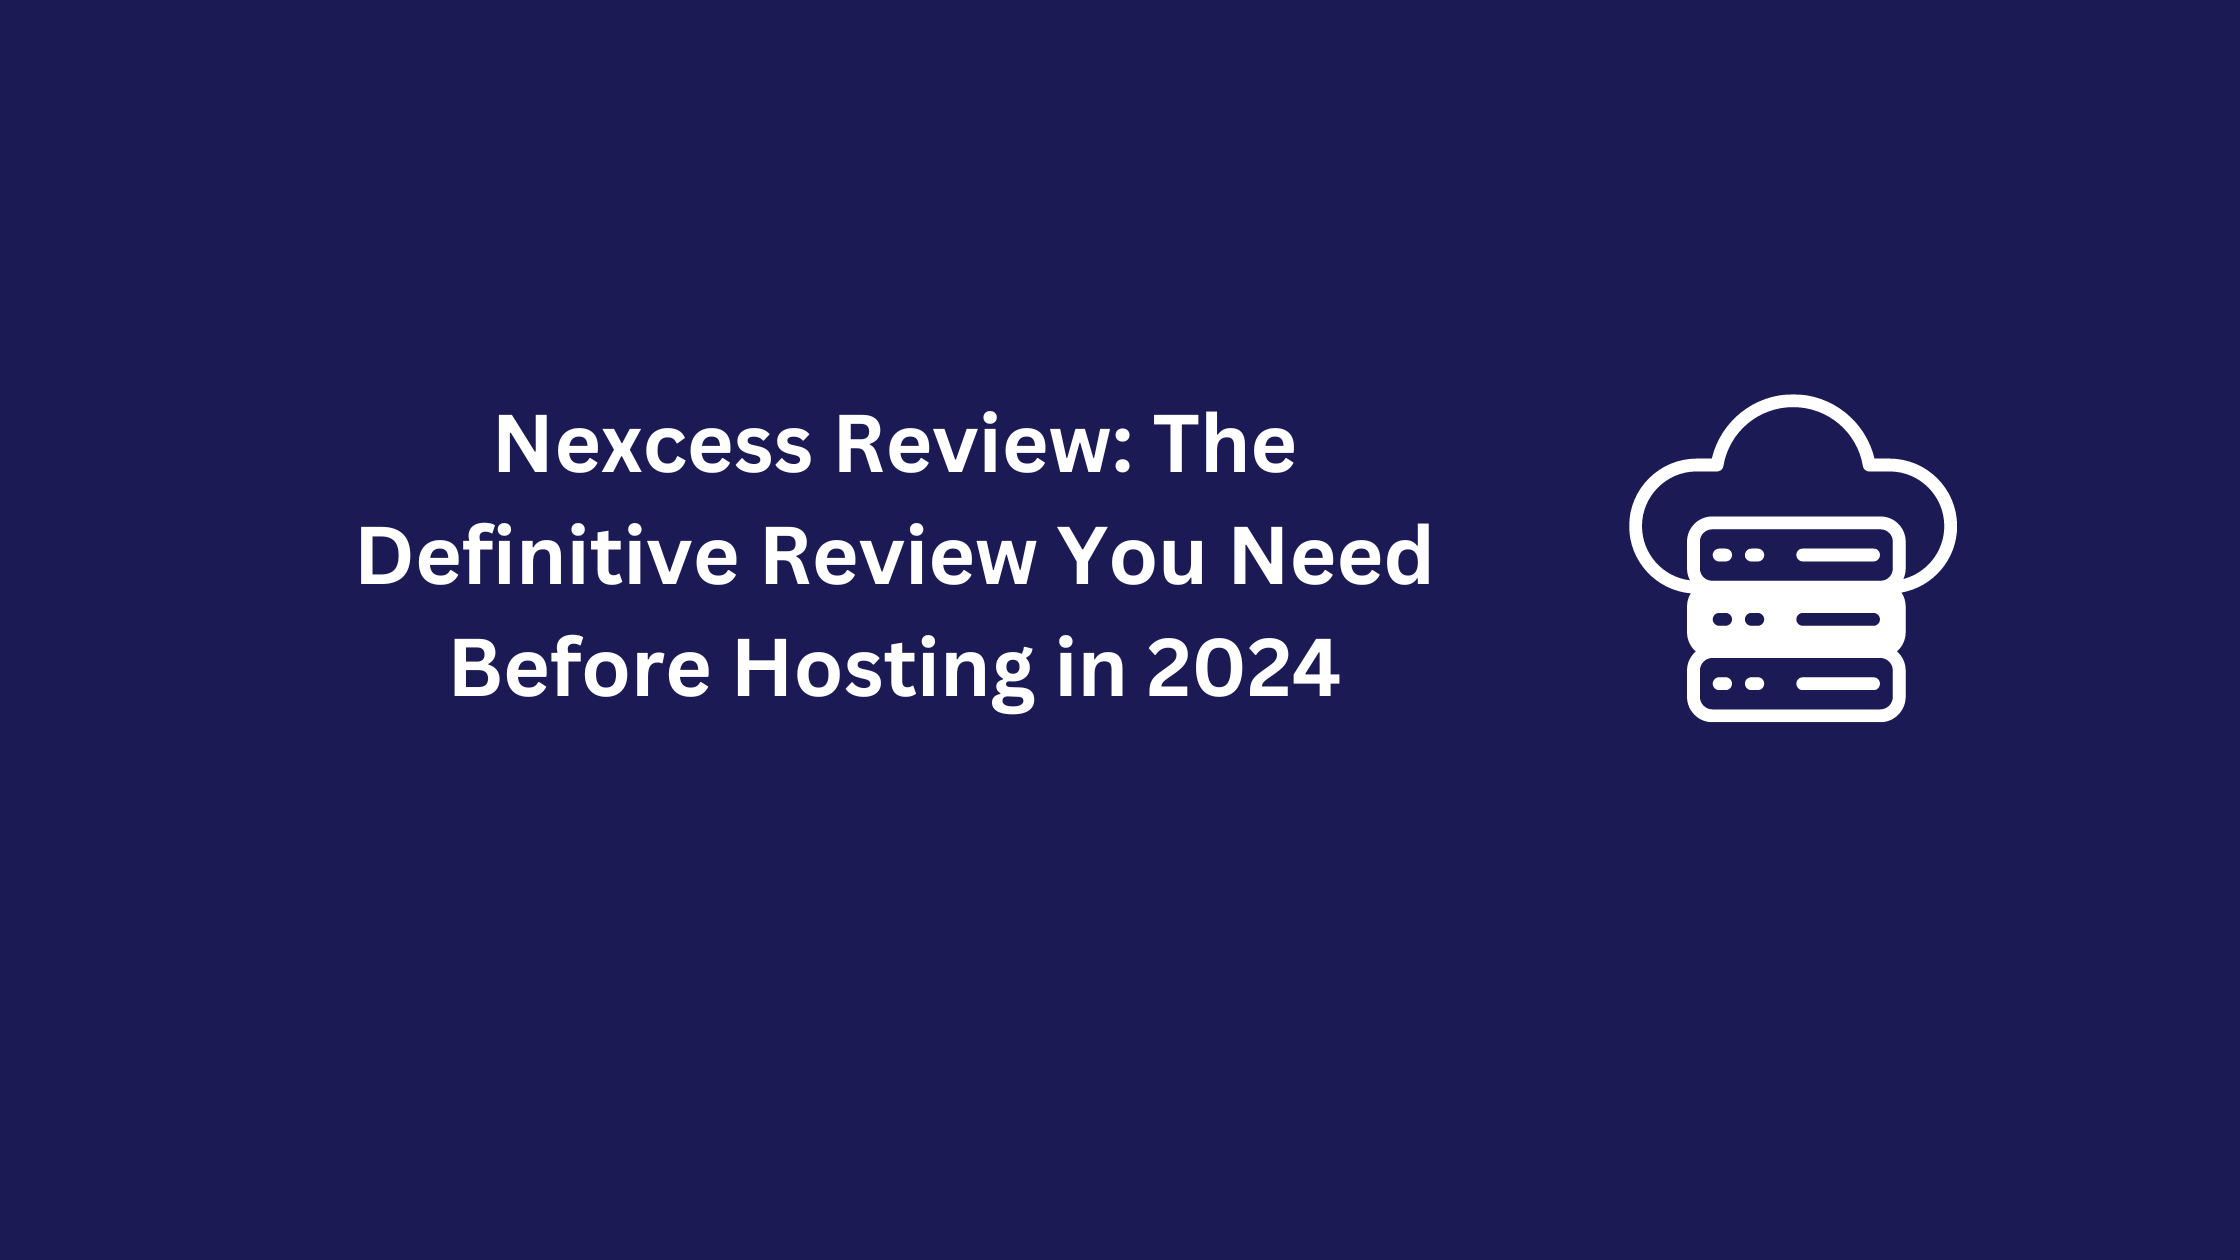 Nexcess Review: The Definitive Review You Need Before Hosting in 2024